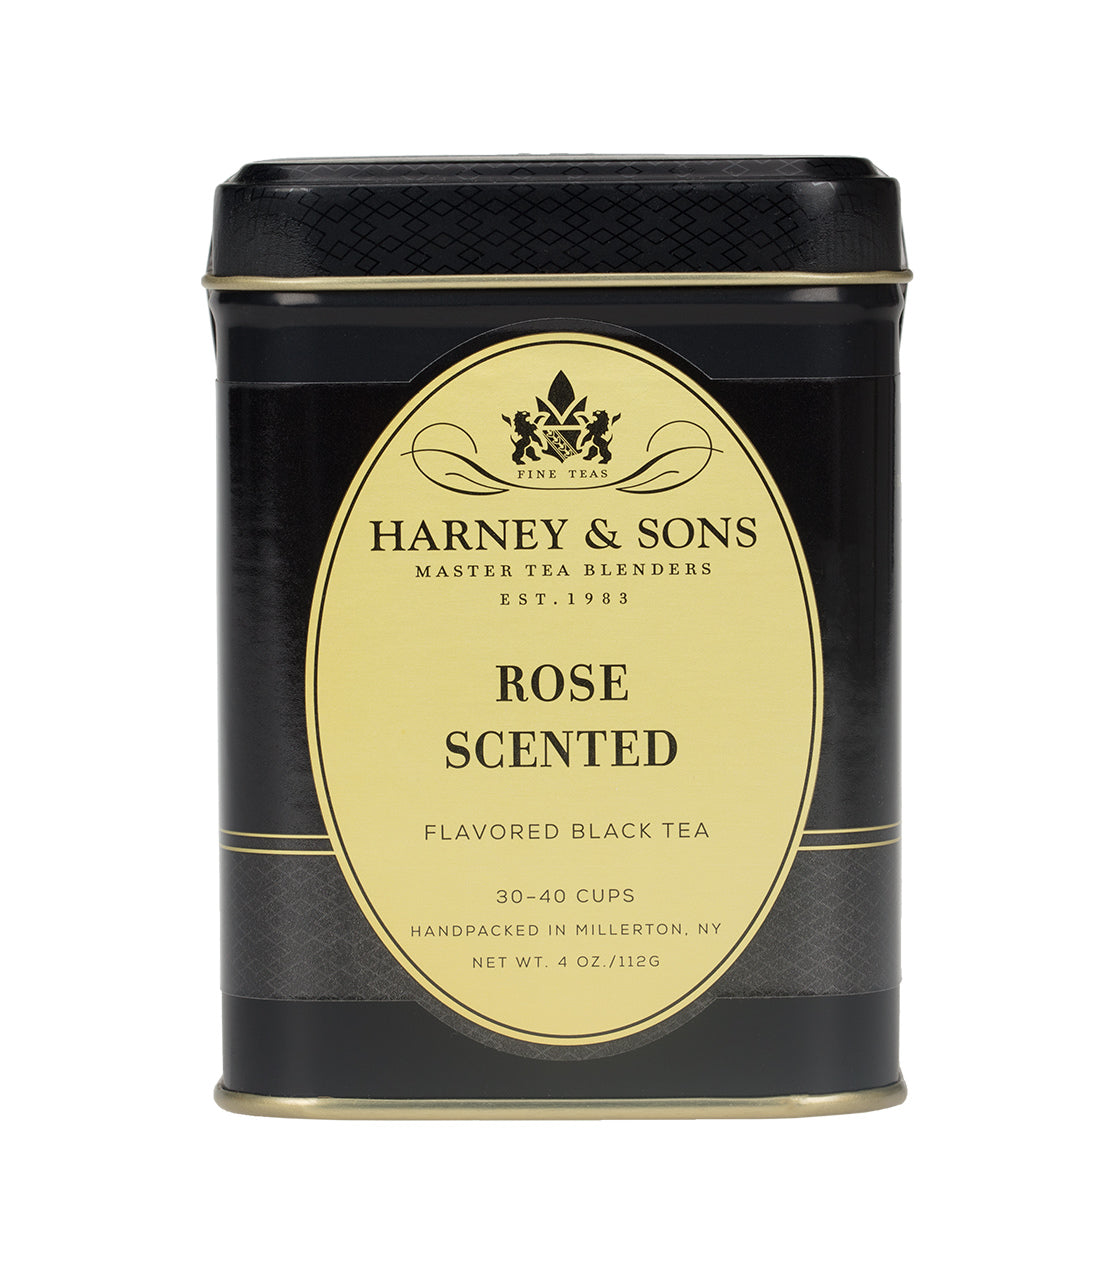 Rose Scented - Loose 4 oz. Tin - Harney & Sons Fine Teas